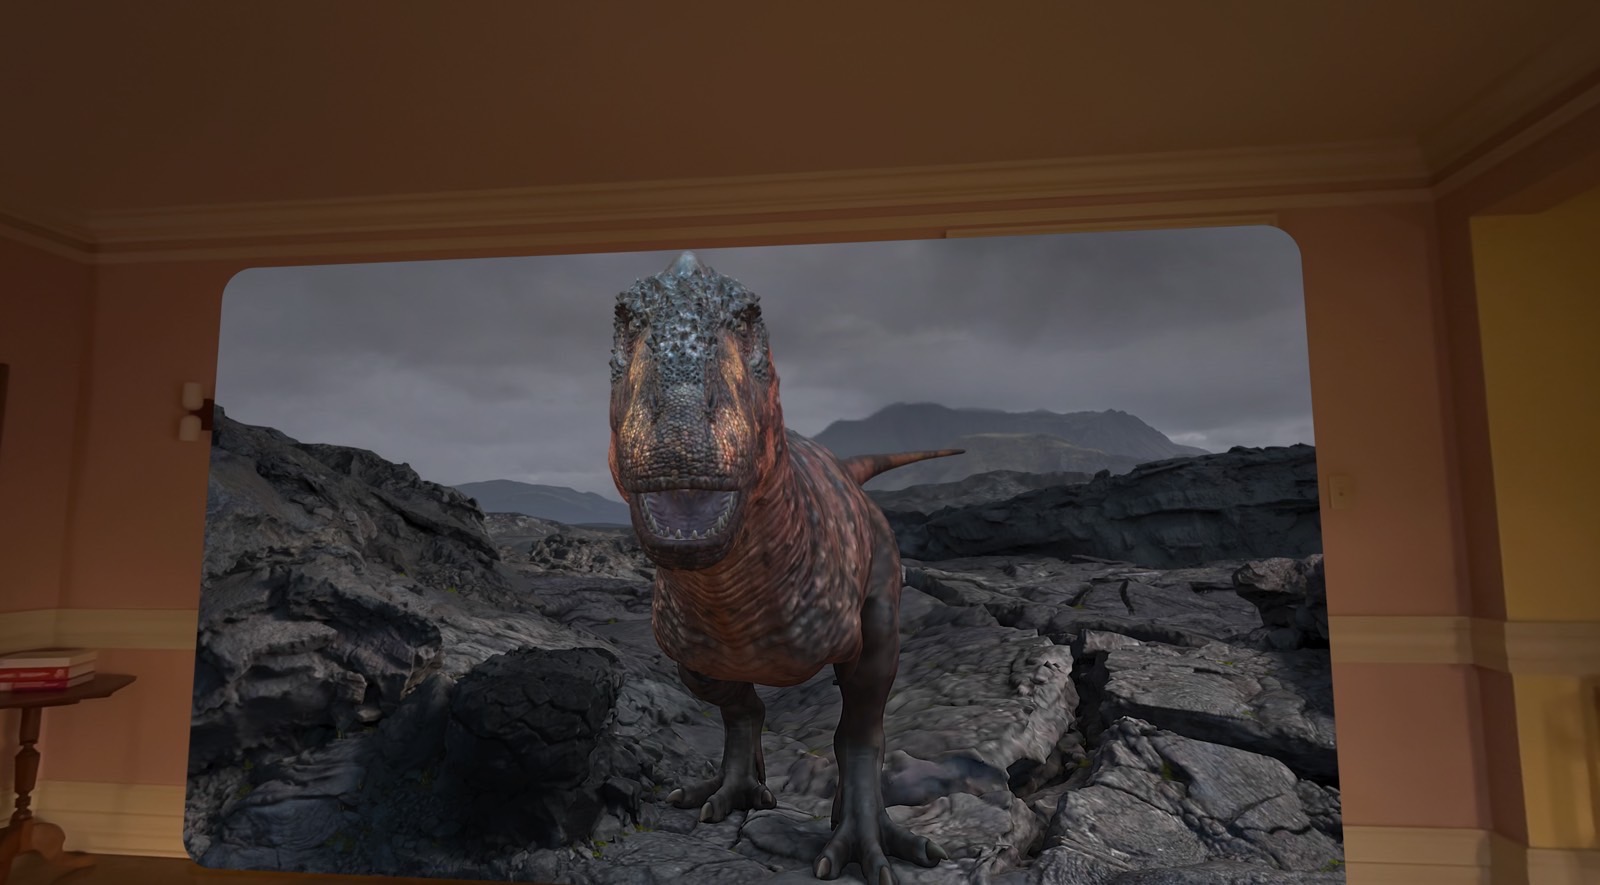 A dinosaur walking into the living room of a person using the Vision Pro headset.